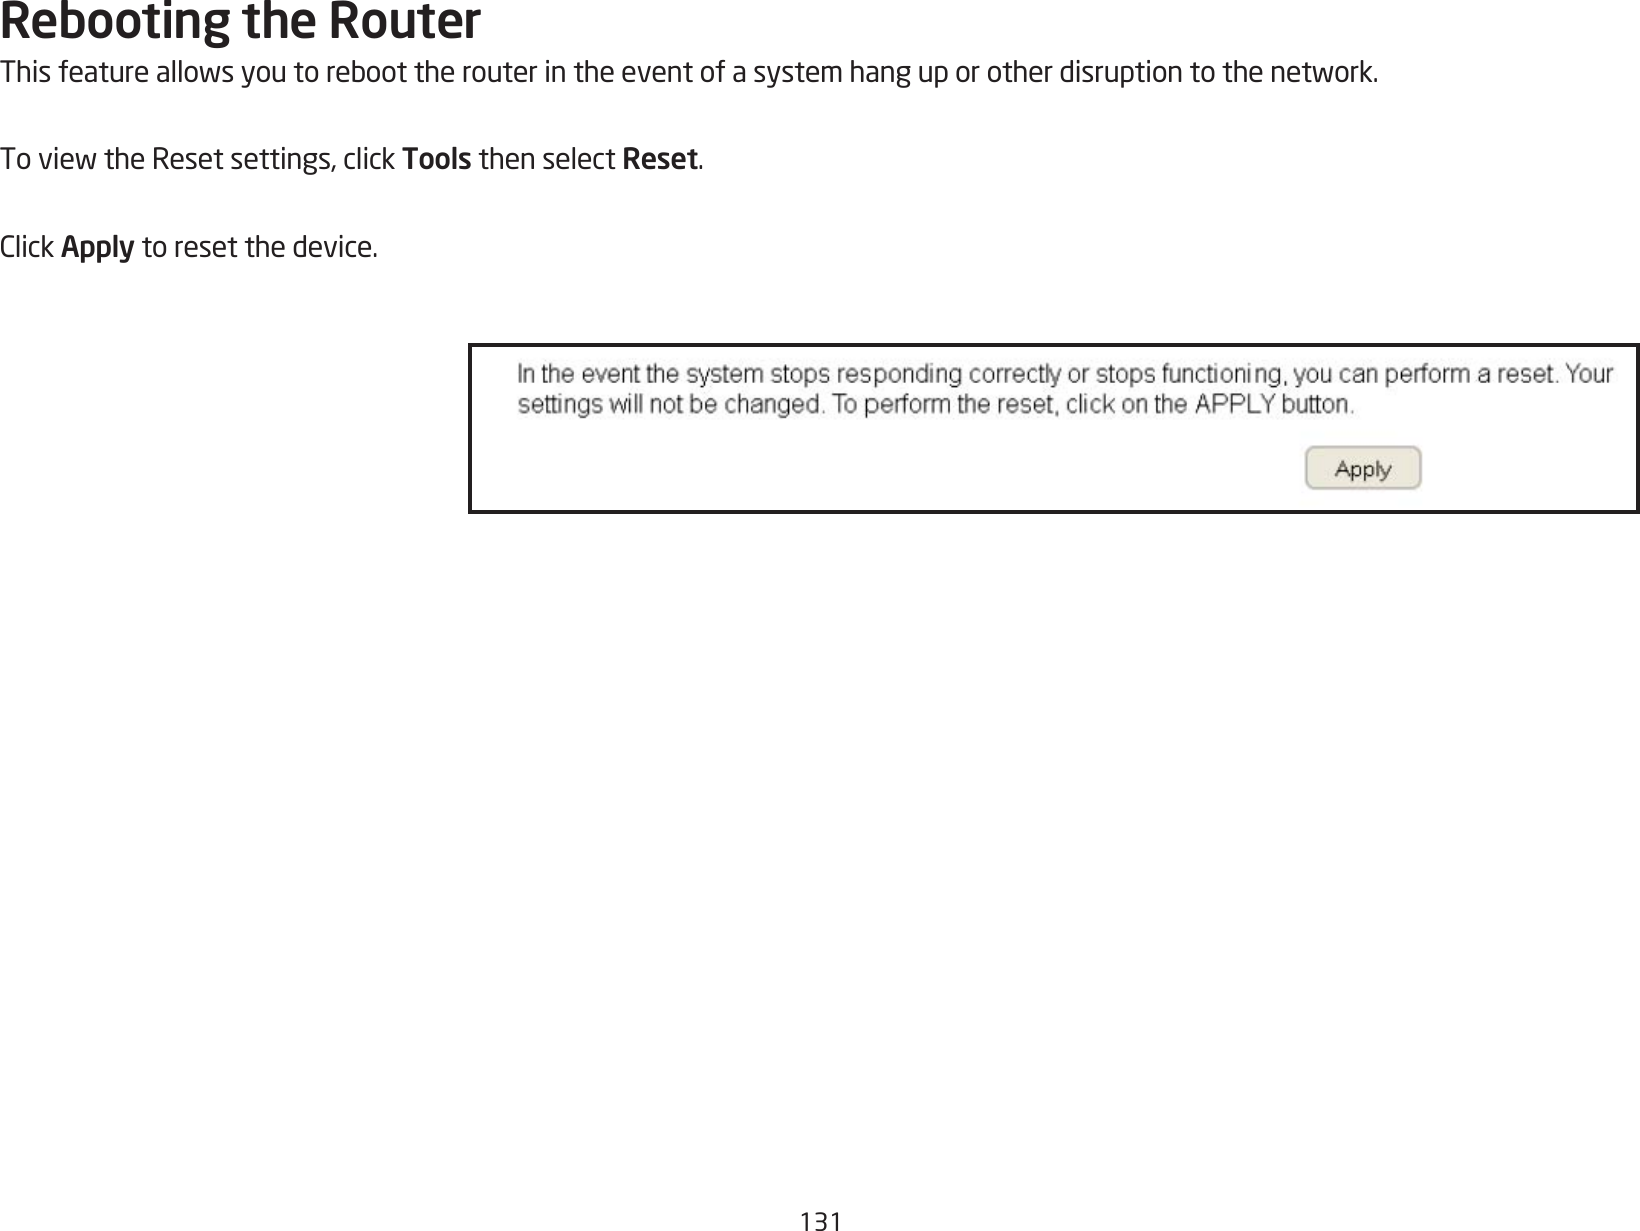 131Rebooting the RouterThisfeatureallowsyoutoreboottherouterintheeventofasystemhanguporotherdisruptiontothenetwork.ToviewtheResetsettings,clickTools then select Reset.ClickApply to reset the device.